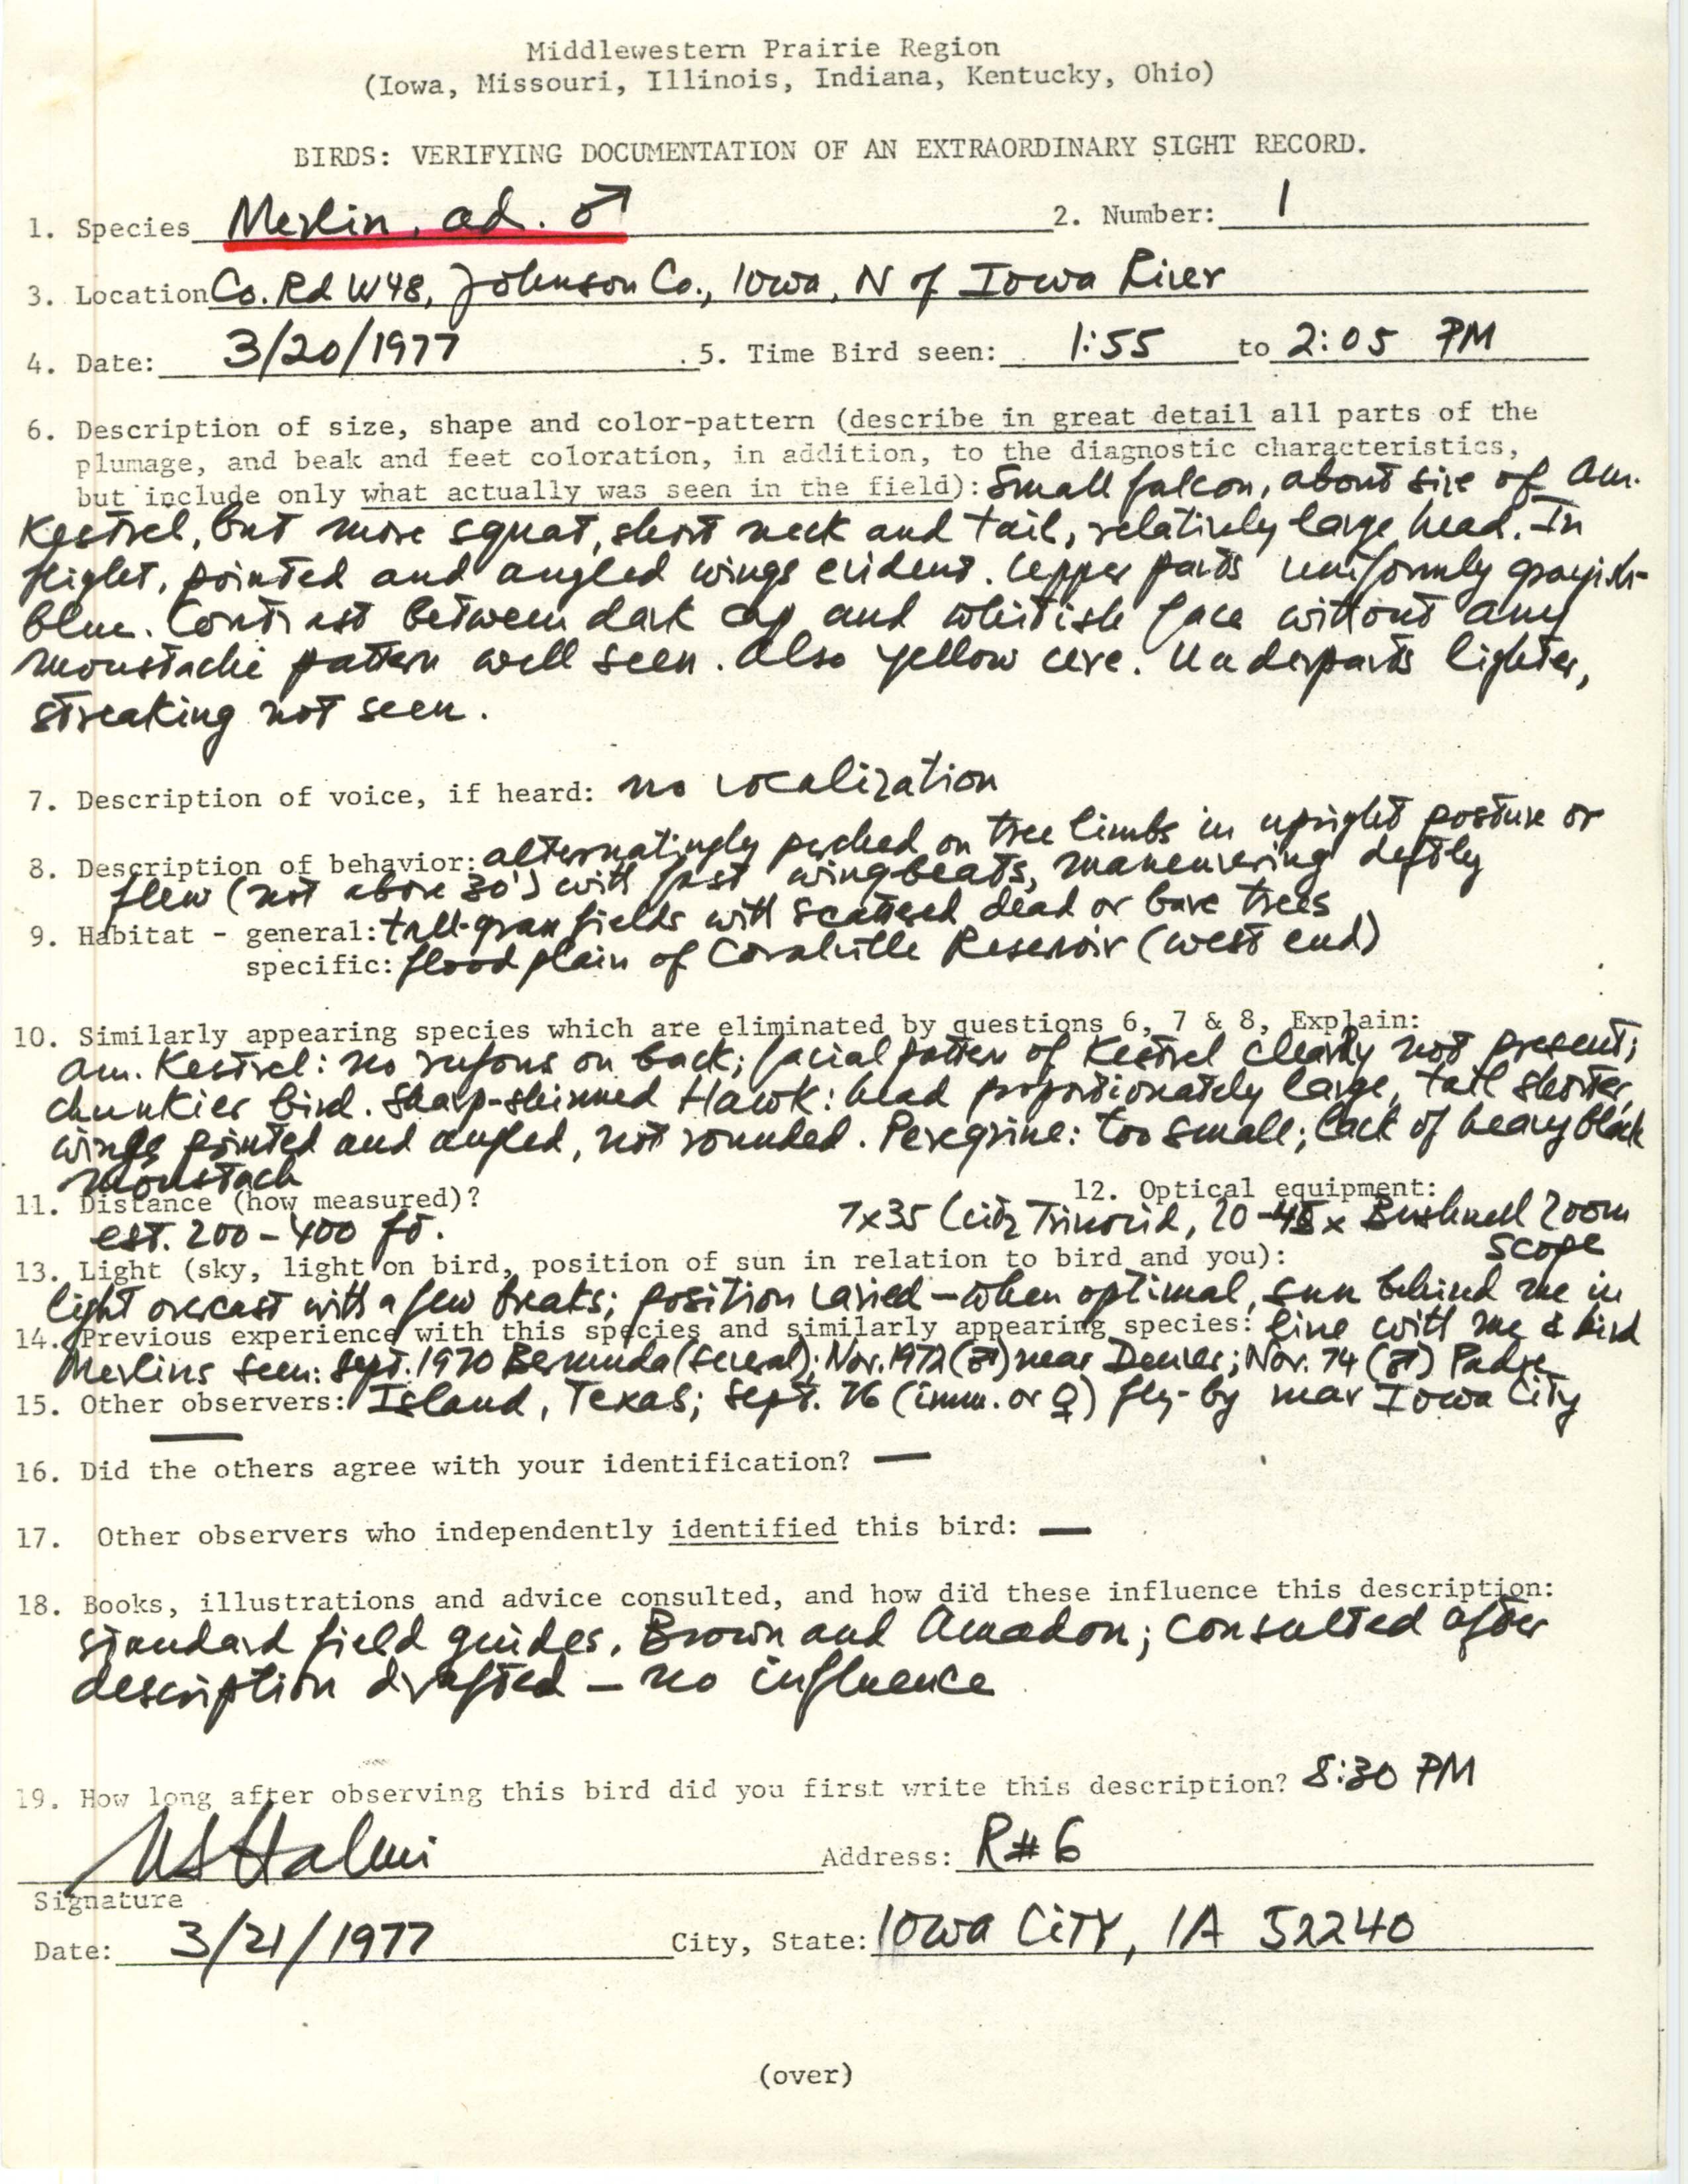 Rare bird documentation form for Merlin at County Road W48 in Johnson County, 1977